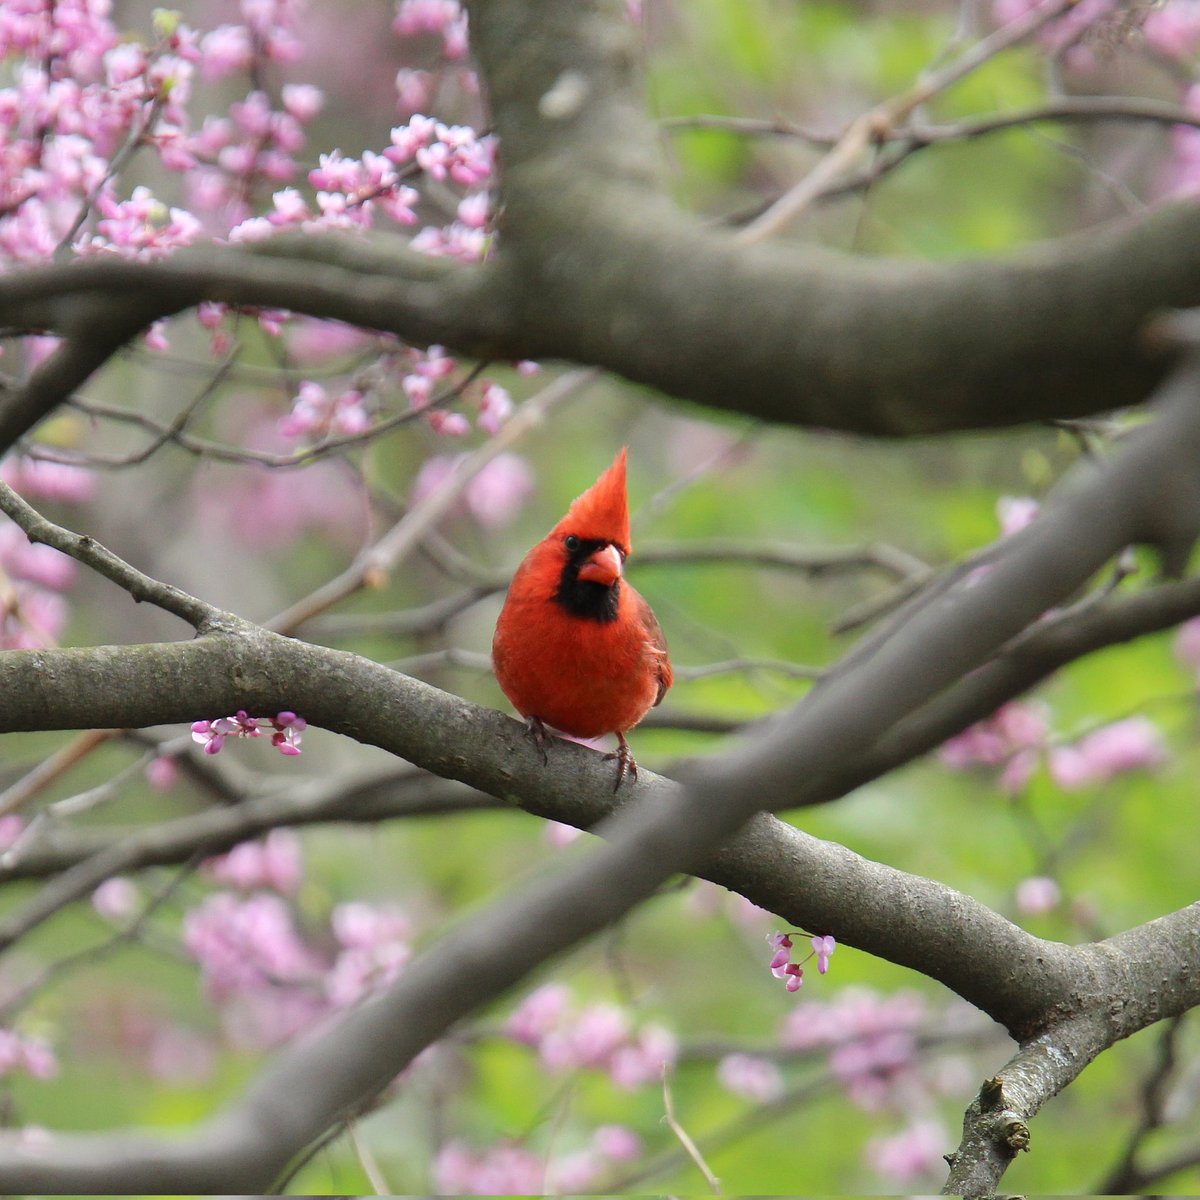 Everyone is enjoying the signs of spring!
#malecardinals #malecardinal #cardinals #cardinal #birding #ohiobirding #ohiobirdworld #ohiobirdingphotography #ohiobirdlovers #birdlovers #dailybirdpix #dailybirdpic